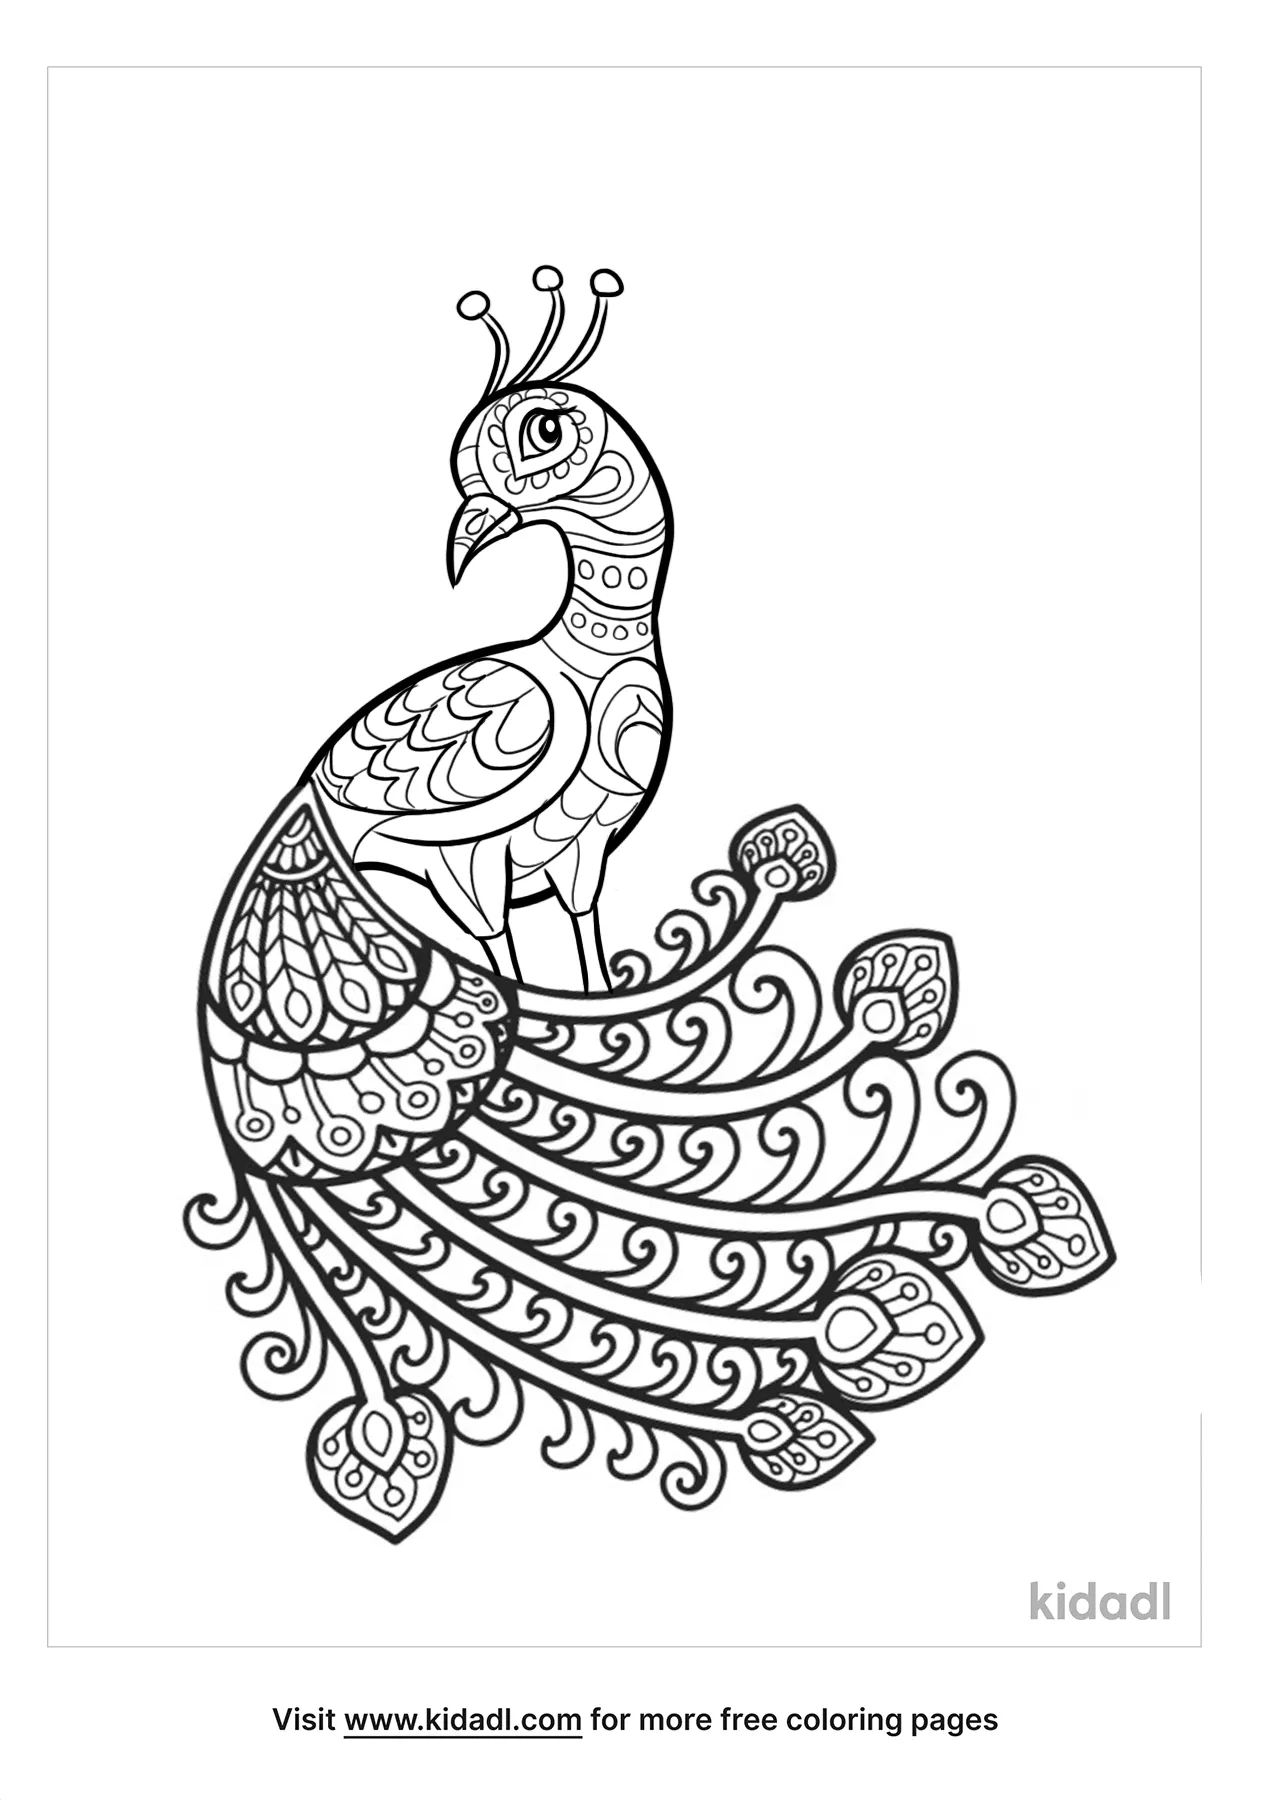 Peacock Mandala Coloring Pages   Free Birds Coloring Pages   Kidadl